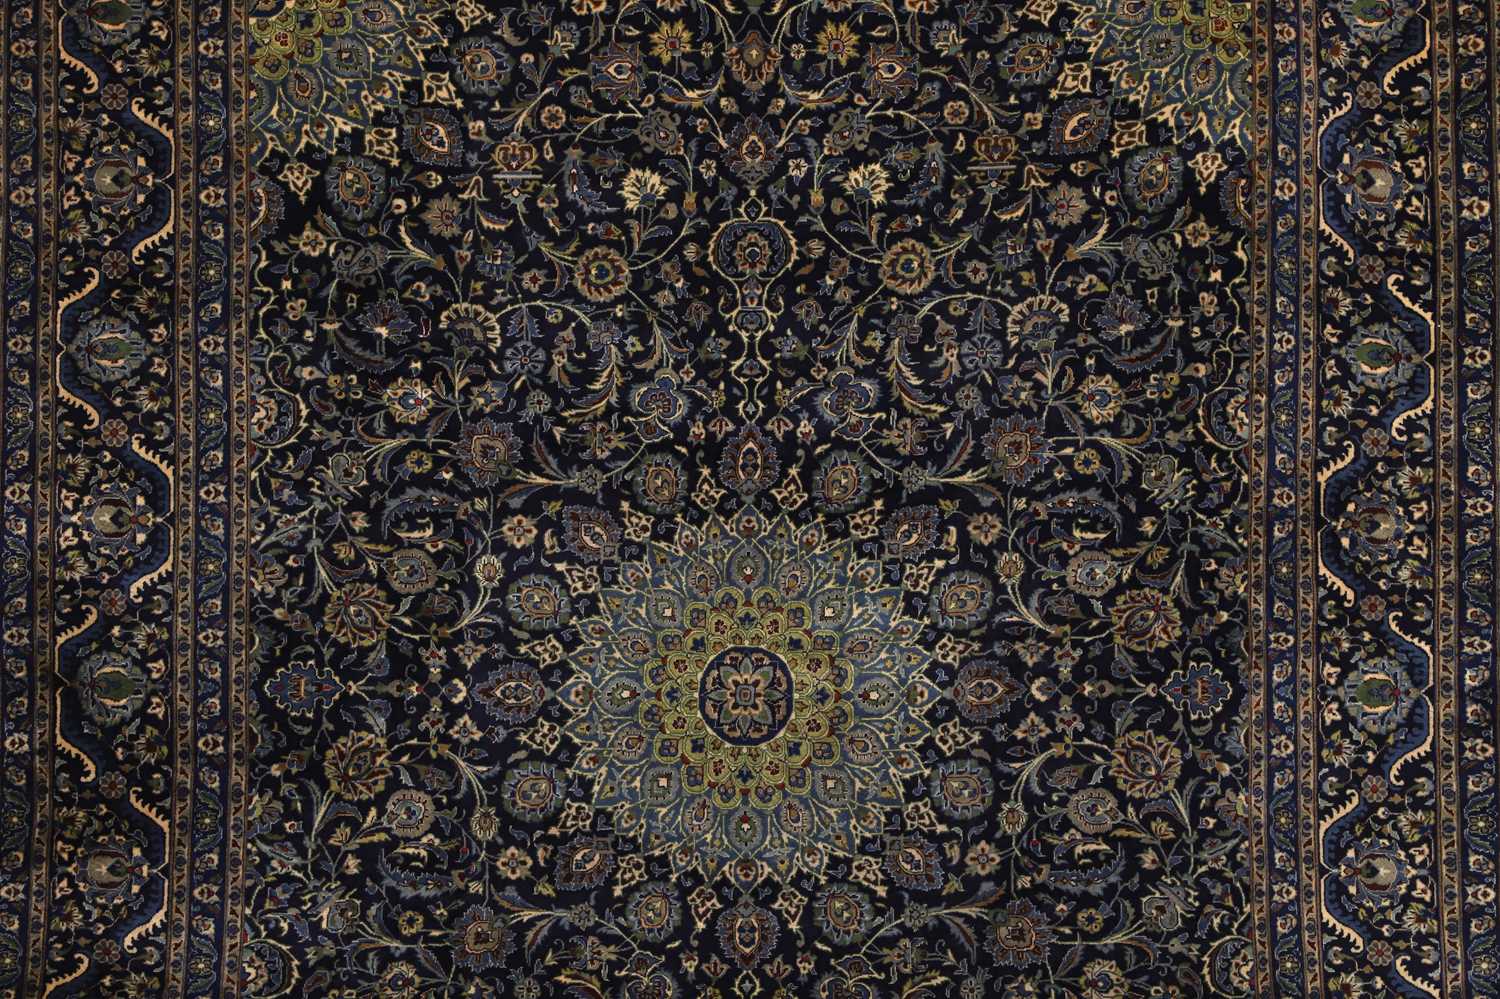 A Meshed carpet, - Image 26 of 30